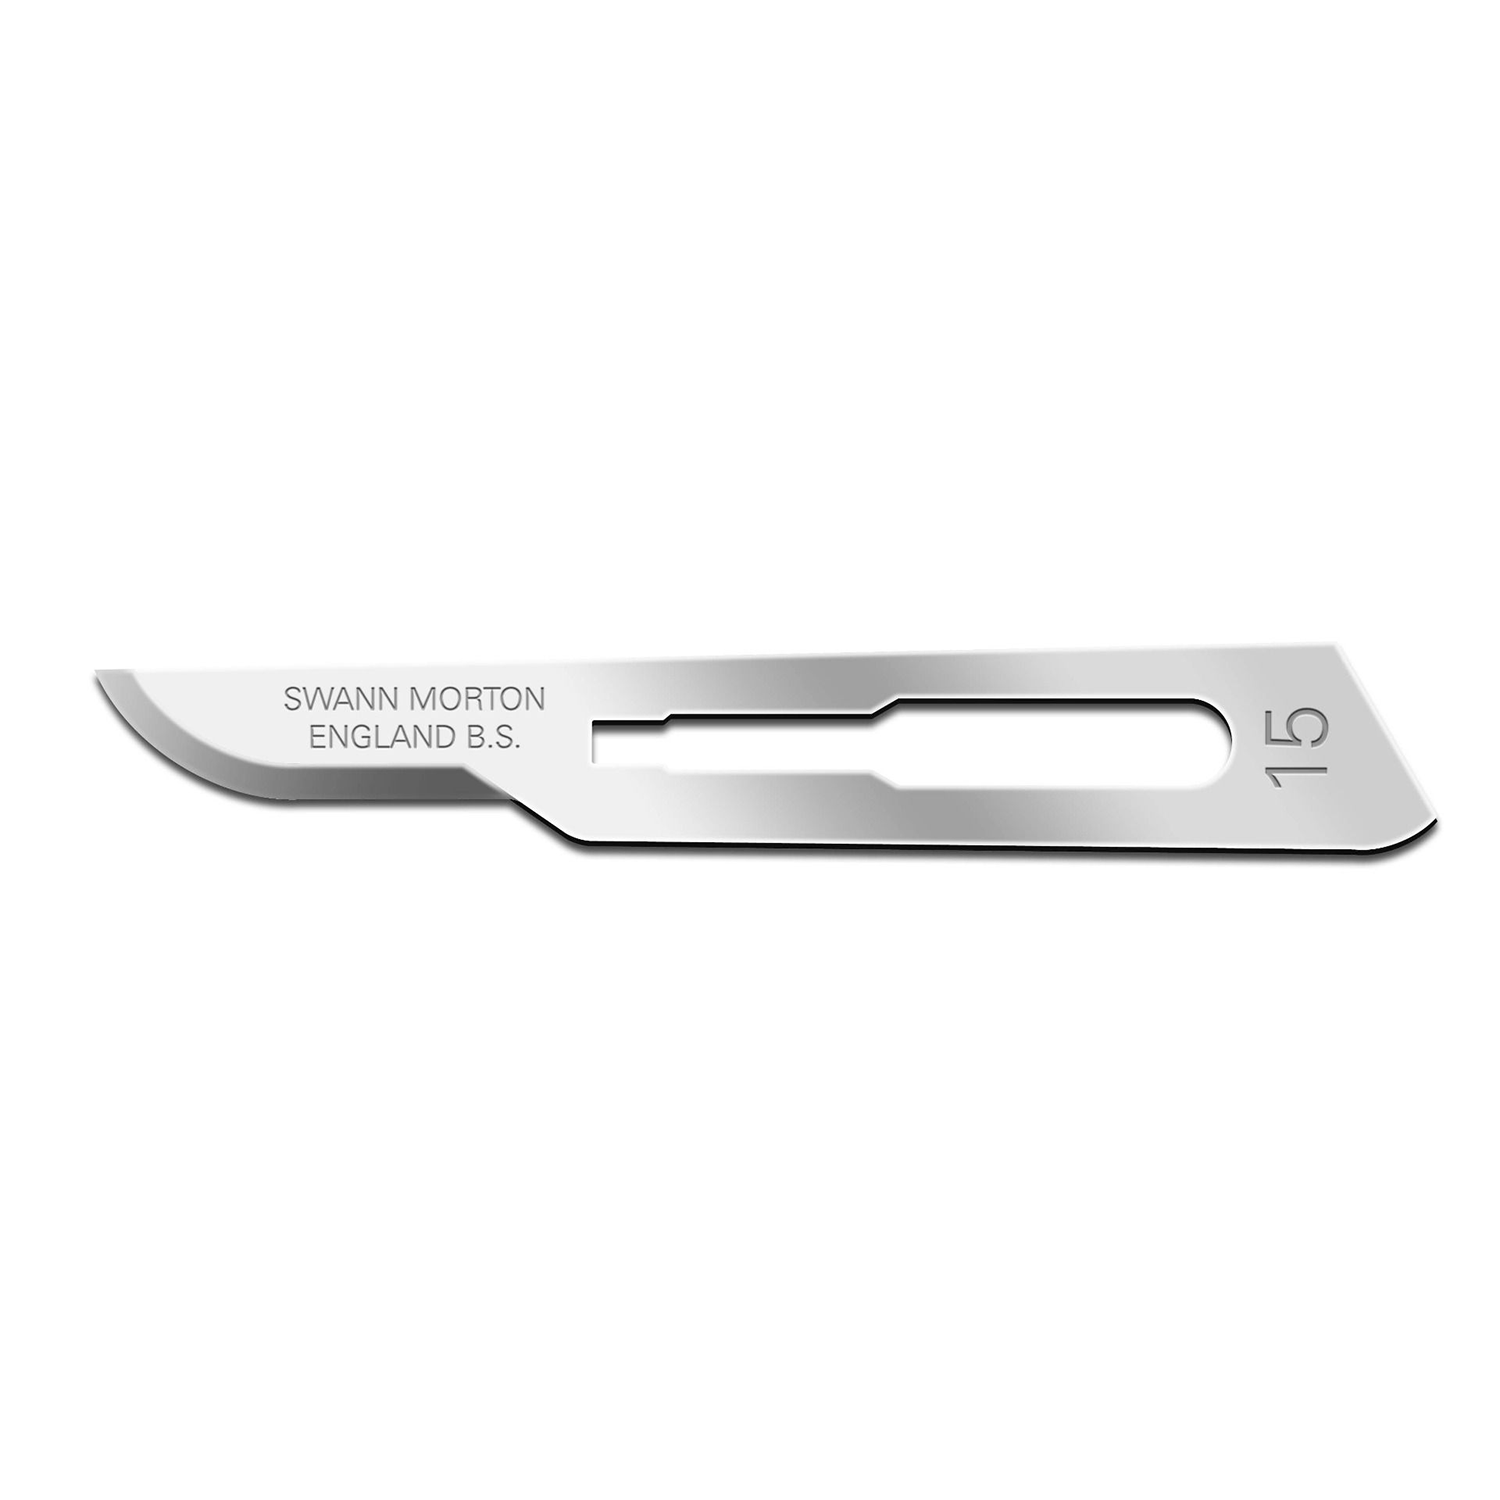 Swann Morton Carbon Steel Surgical Blades | No.15 | Sterile | Pack of 100